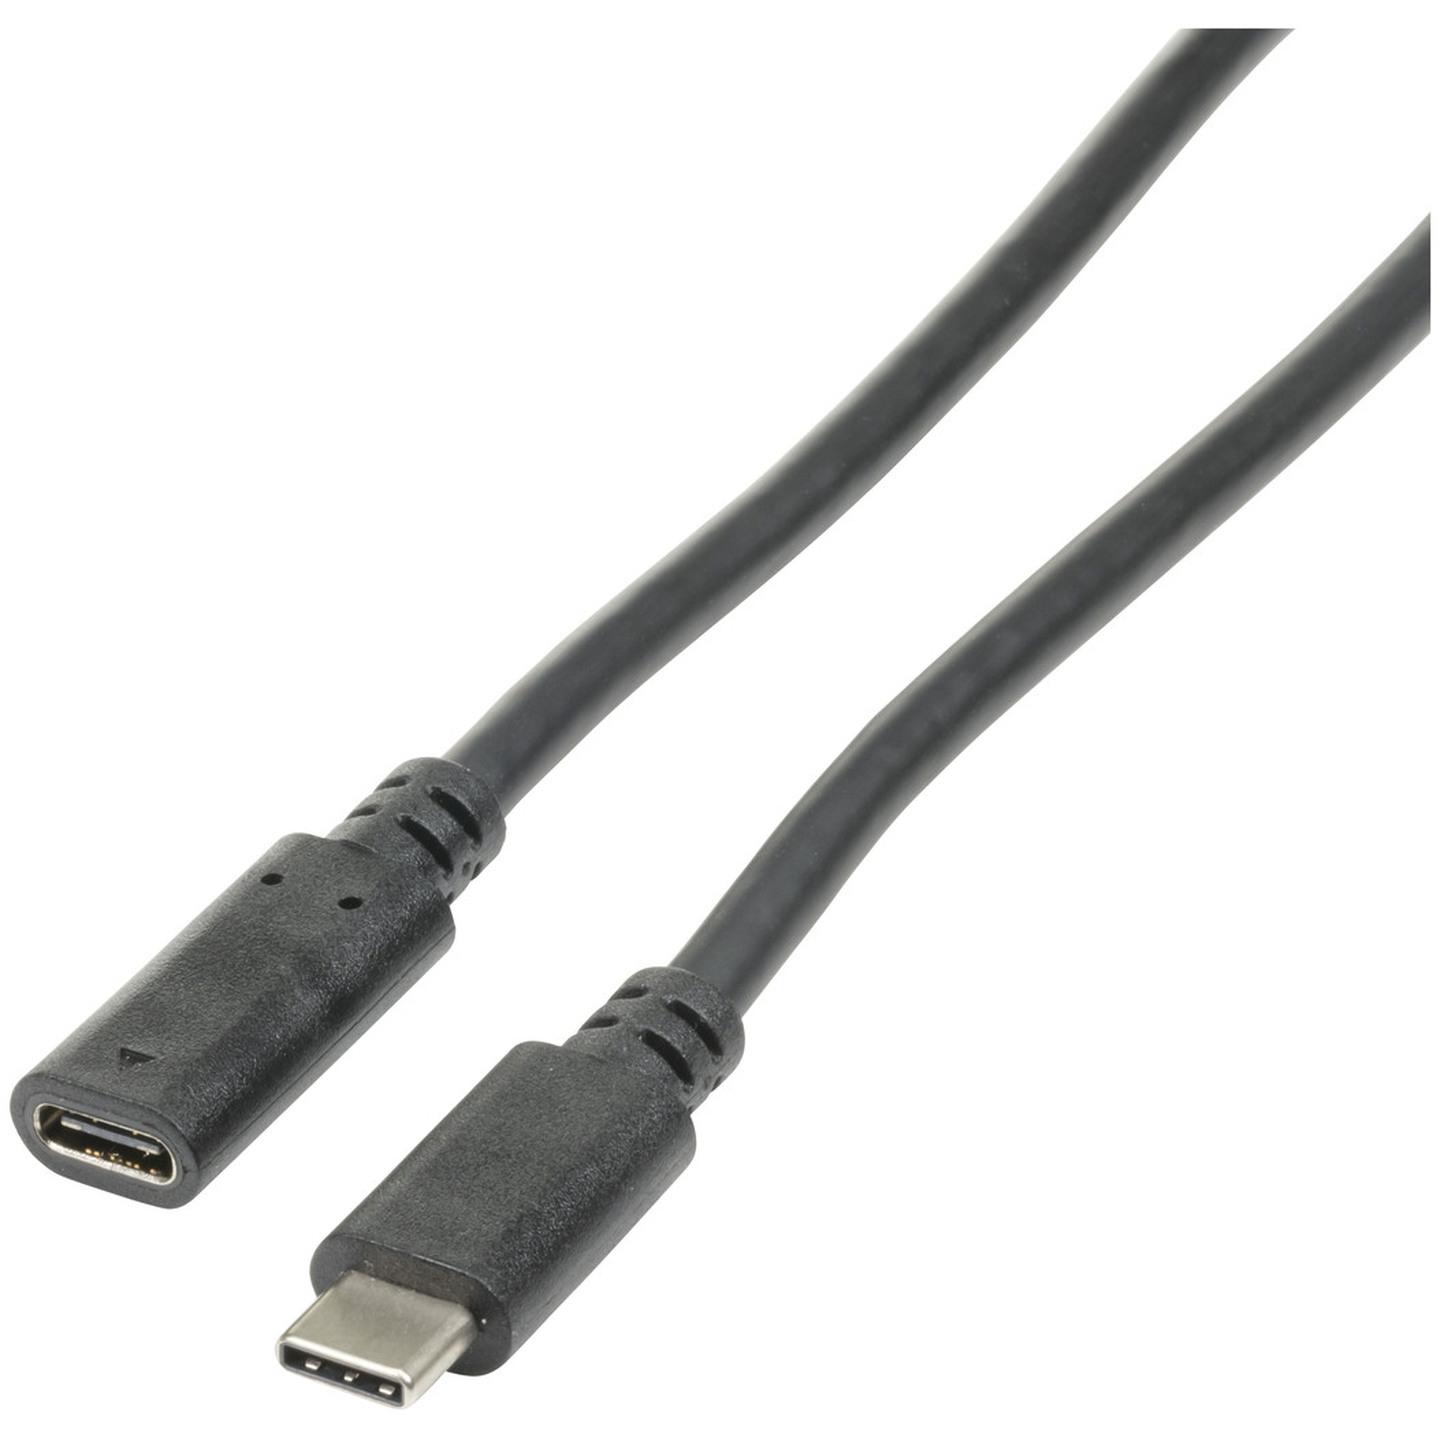 USB 3.2 Type-C Extension Cable 3m